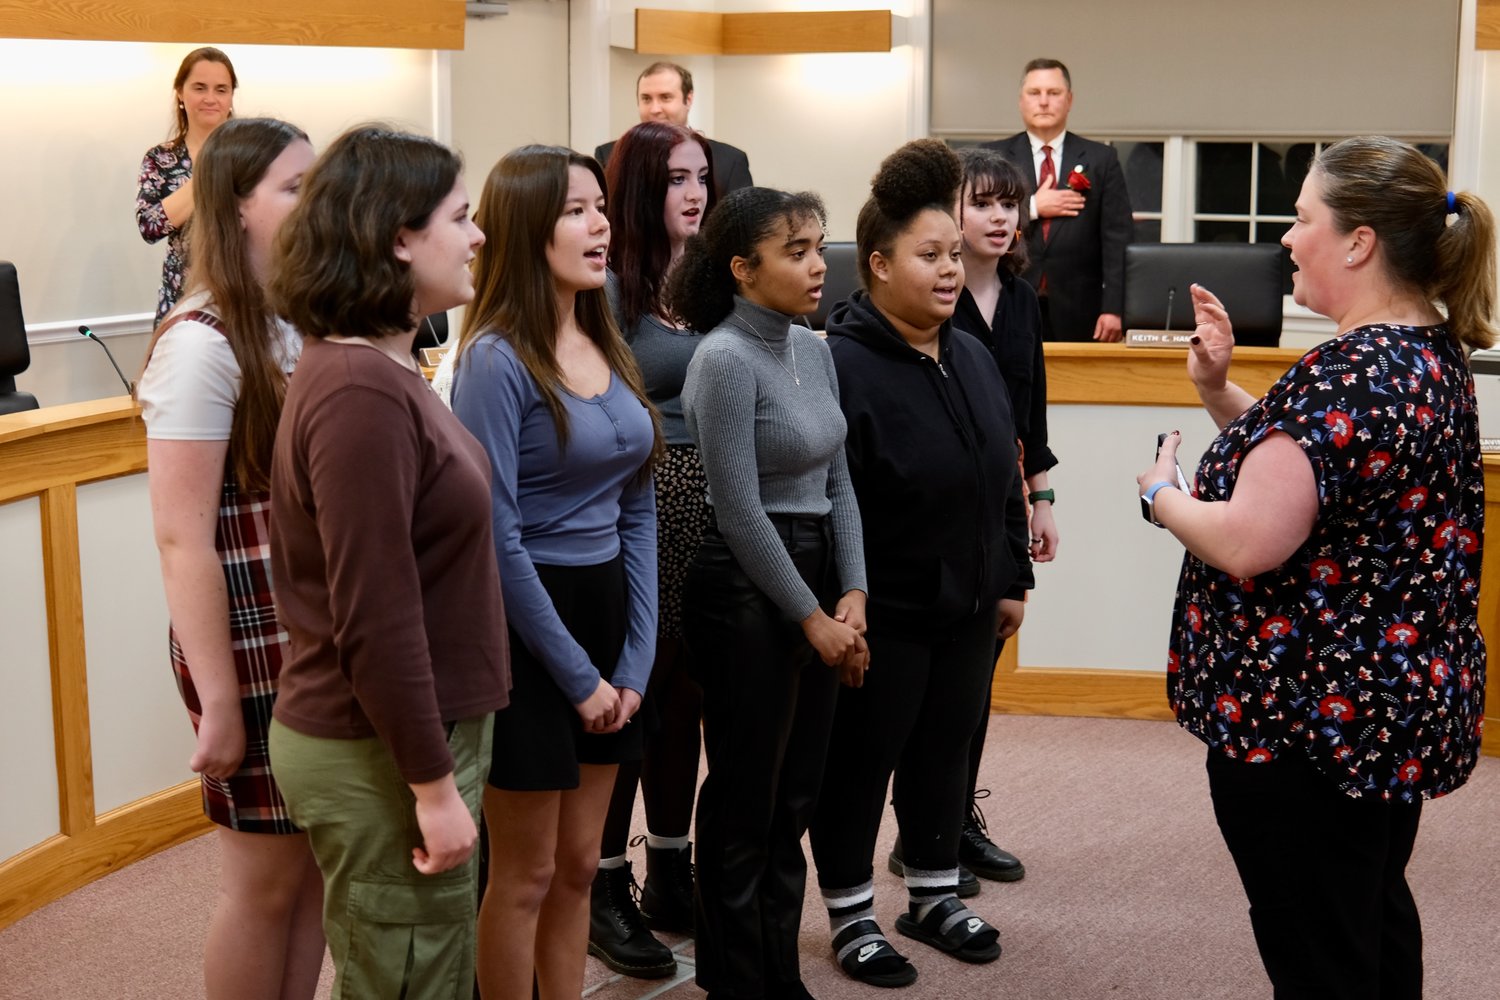 Members of the Portsmouth High School Vocal Ensemble, led by Shawna Gleason, sing The National Anthem at the start of the program. Behind them are Town Council members Daniela Abbott, Andrew Kelly (outgoing) and Keith Hamilton.